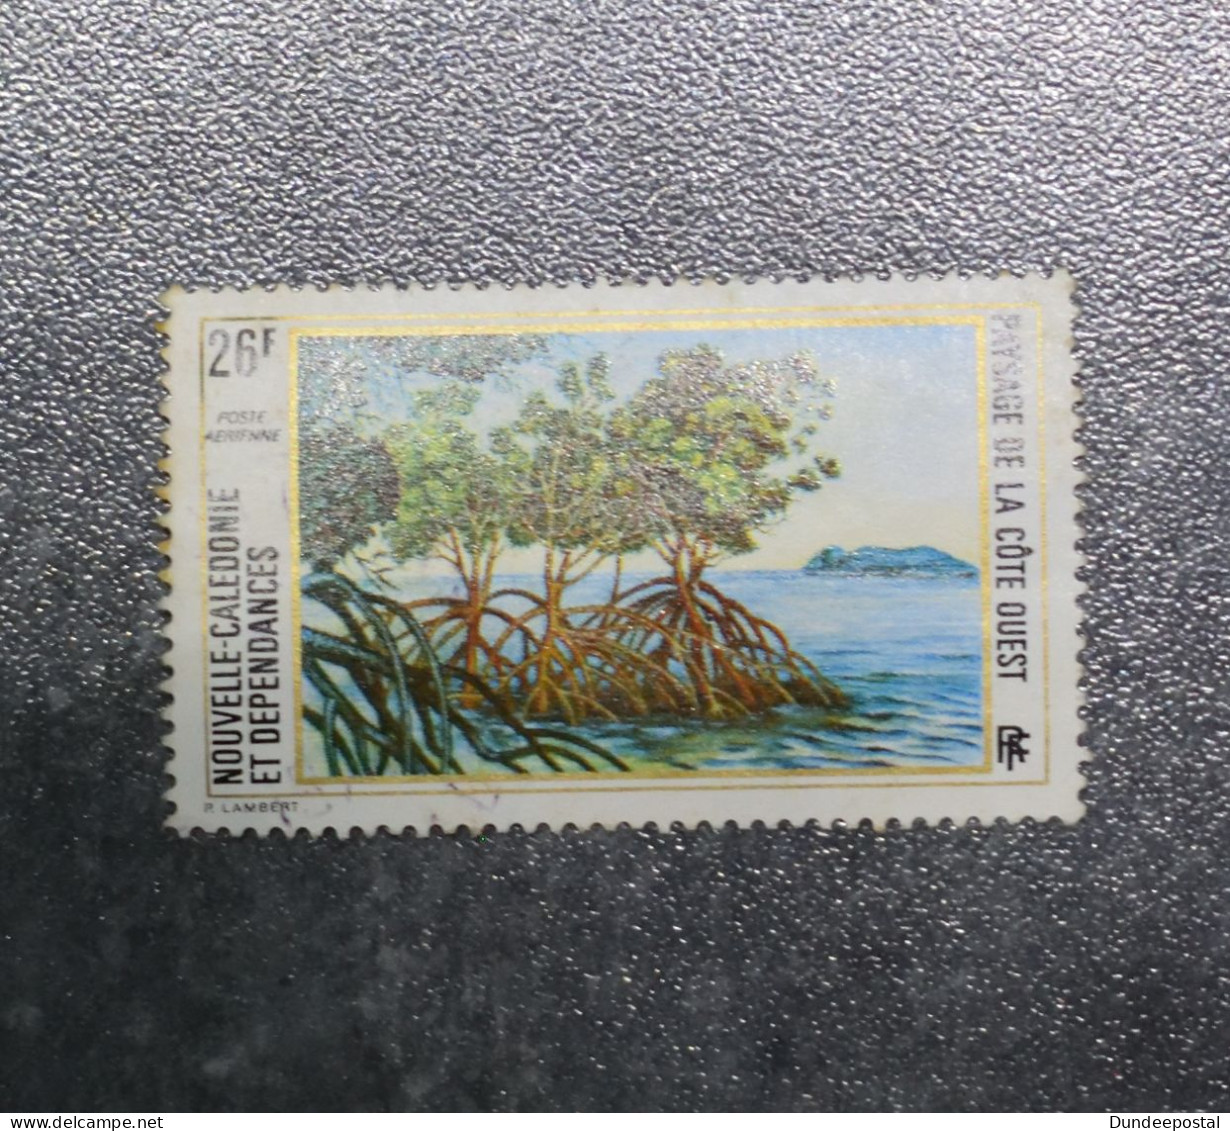 NEW CALEDONIA   FRANCE   STAMPS  1983      ~~L@@K~~ - Used Stamps